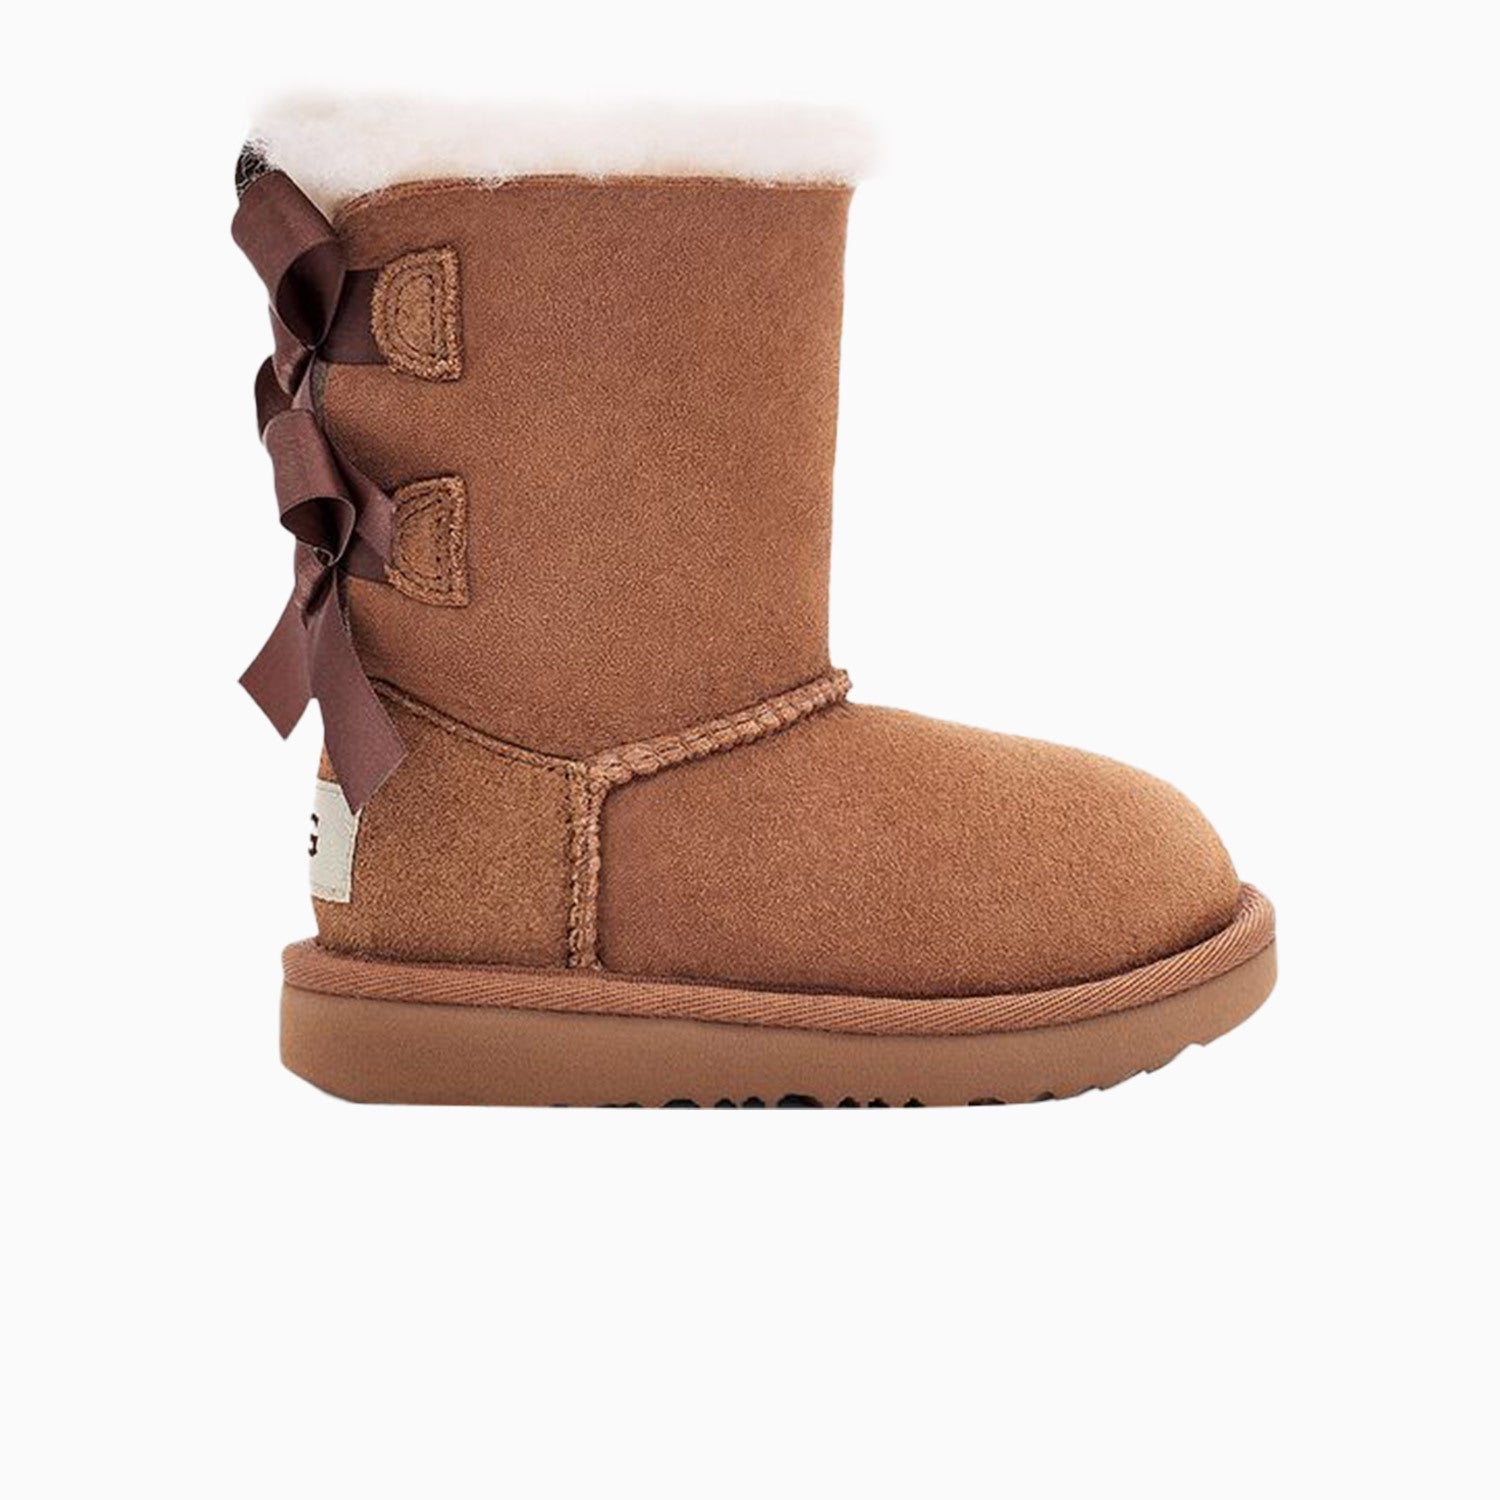 ugg-kids-bailey-bow-ii-toddler-boot-1017394t-rbrd